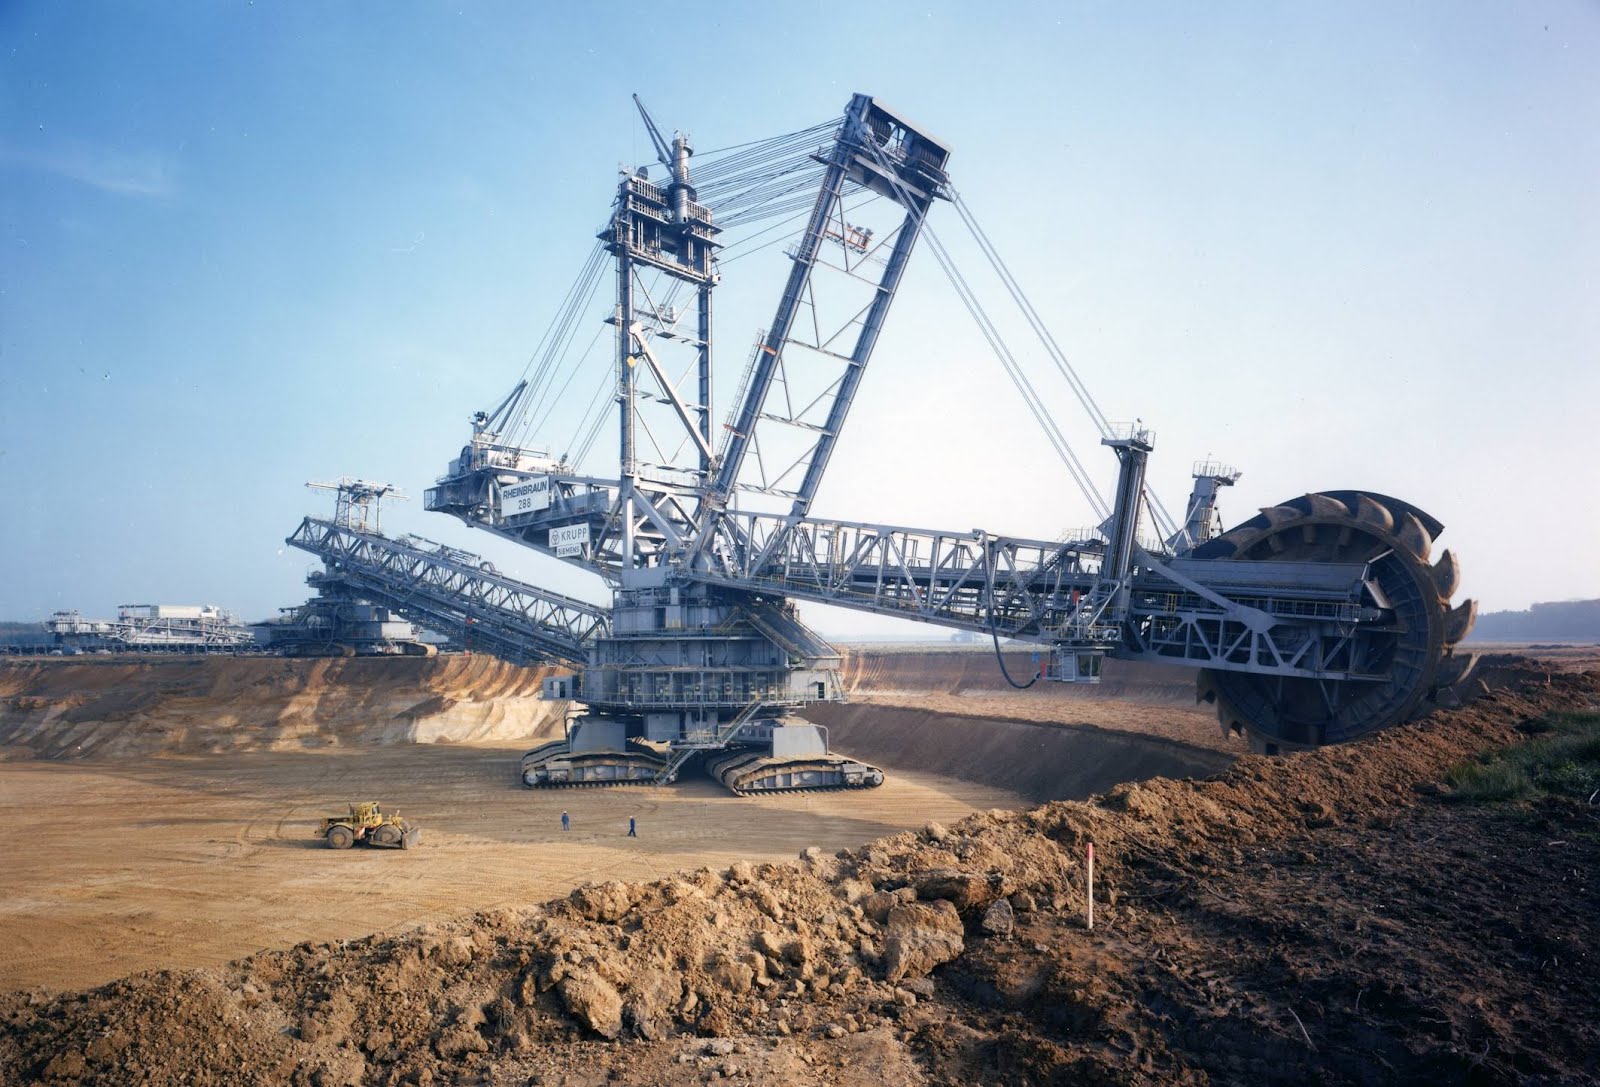 Bagger 288, the largest land vehicle in the world